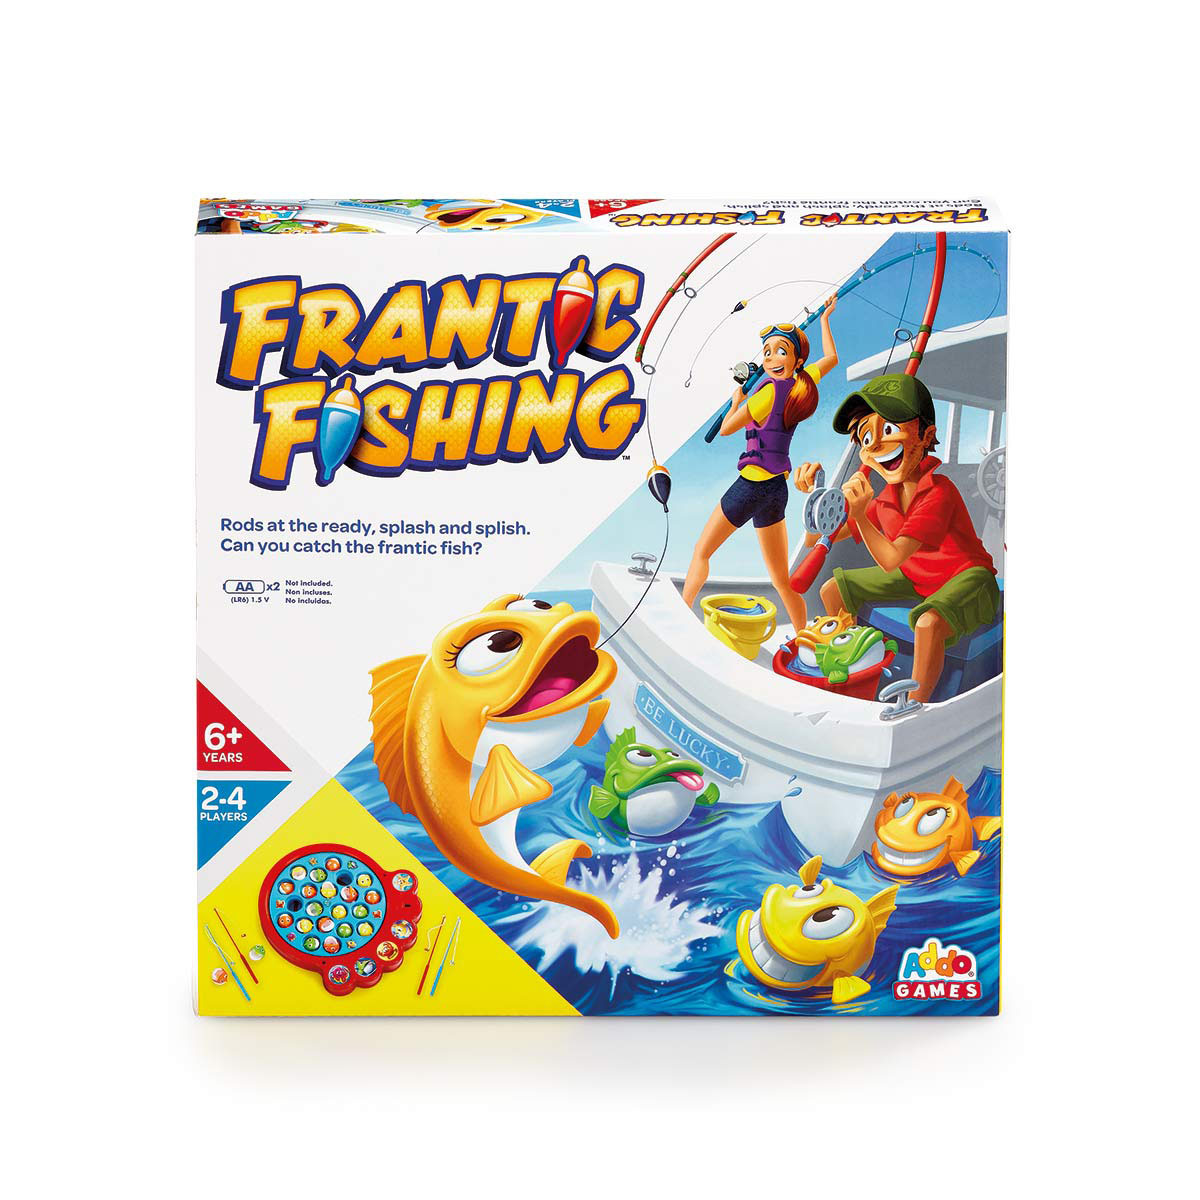 Addo Games Frantic Fishing | The Entertainer